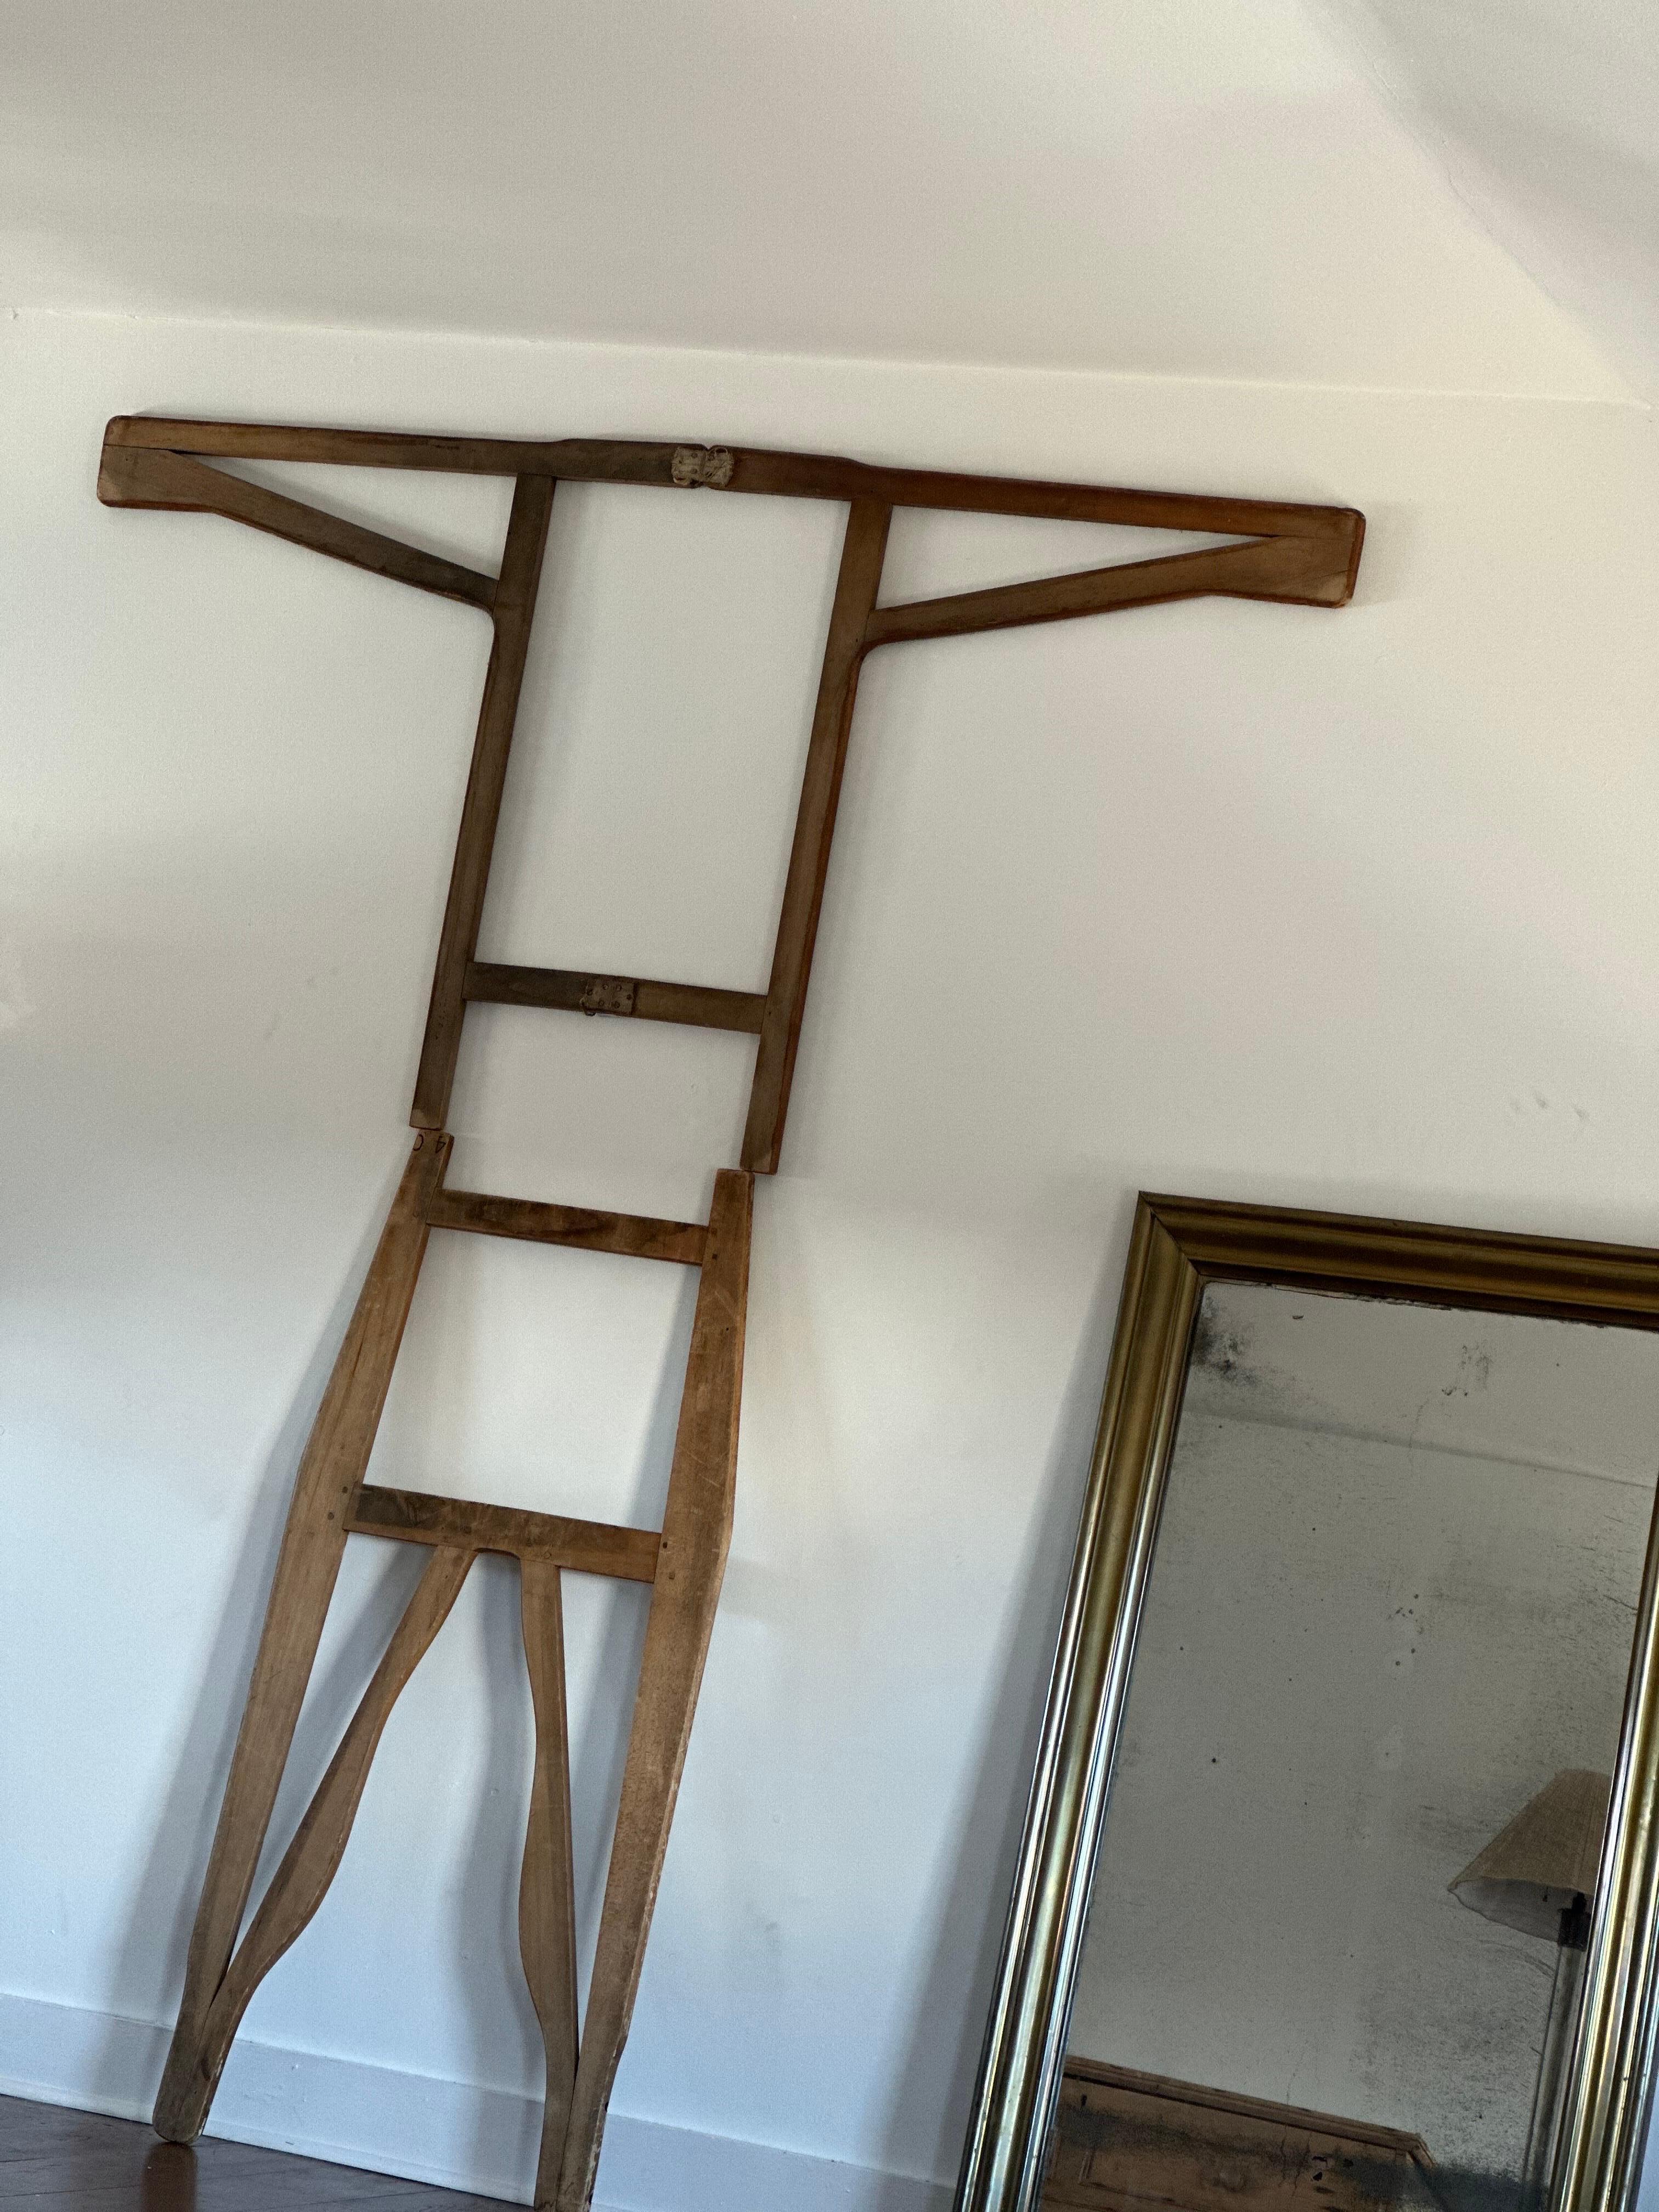 19th century shaker clothes stretcher. Massive size. Marked with a “40”
Bottoms measure H52.5” W24”
Top measures H37” W72”
The shirt is hinged in the middle with two clothe strips and folds in half. 
Amazing historical and sculptural thing. 